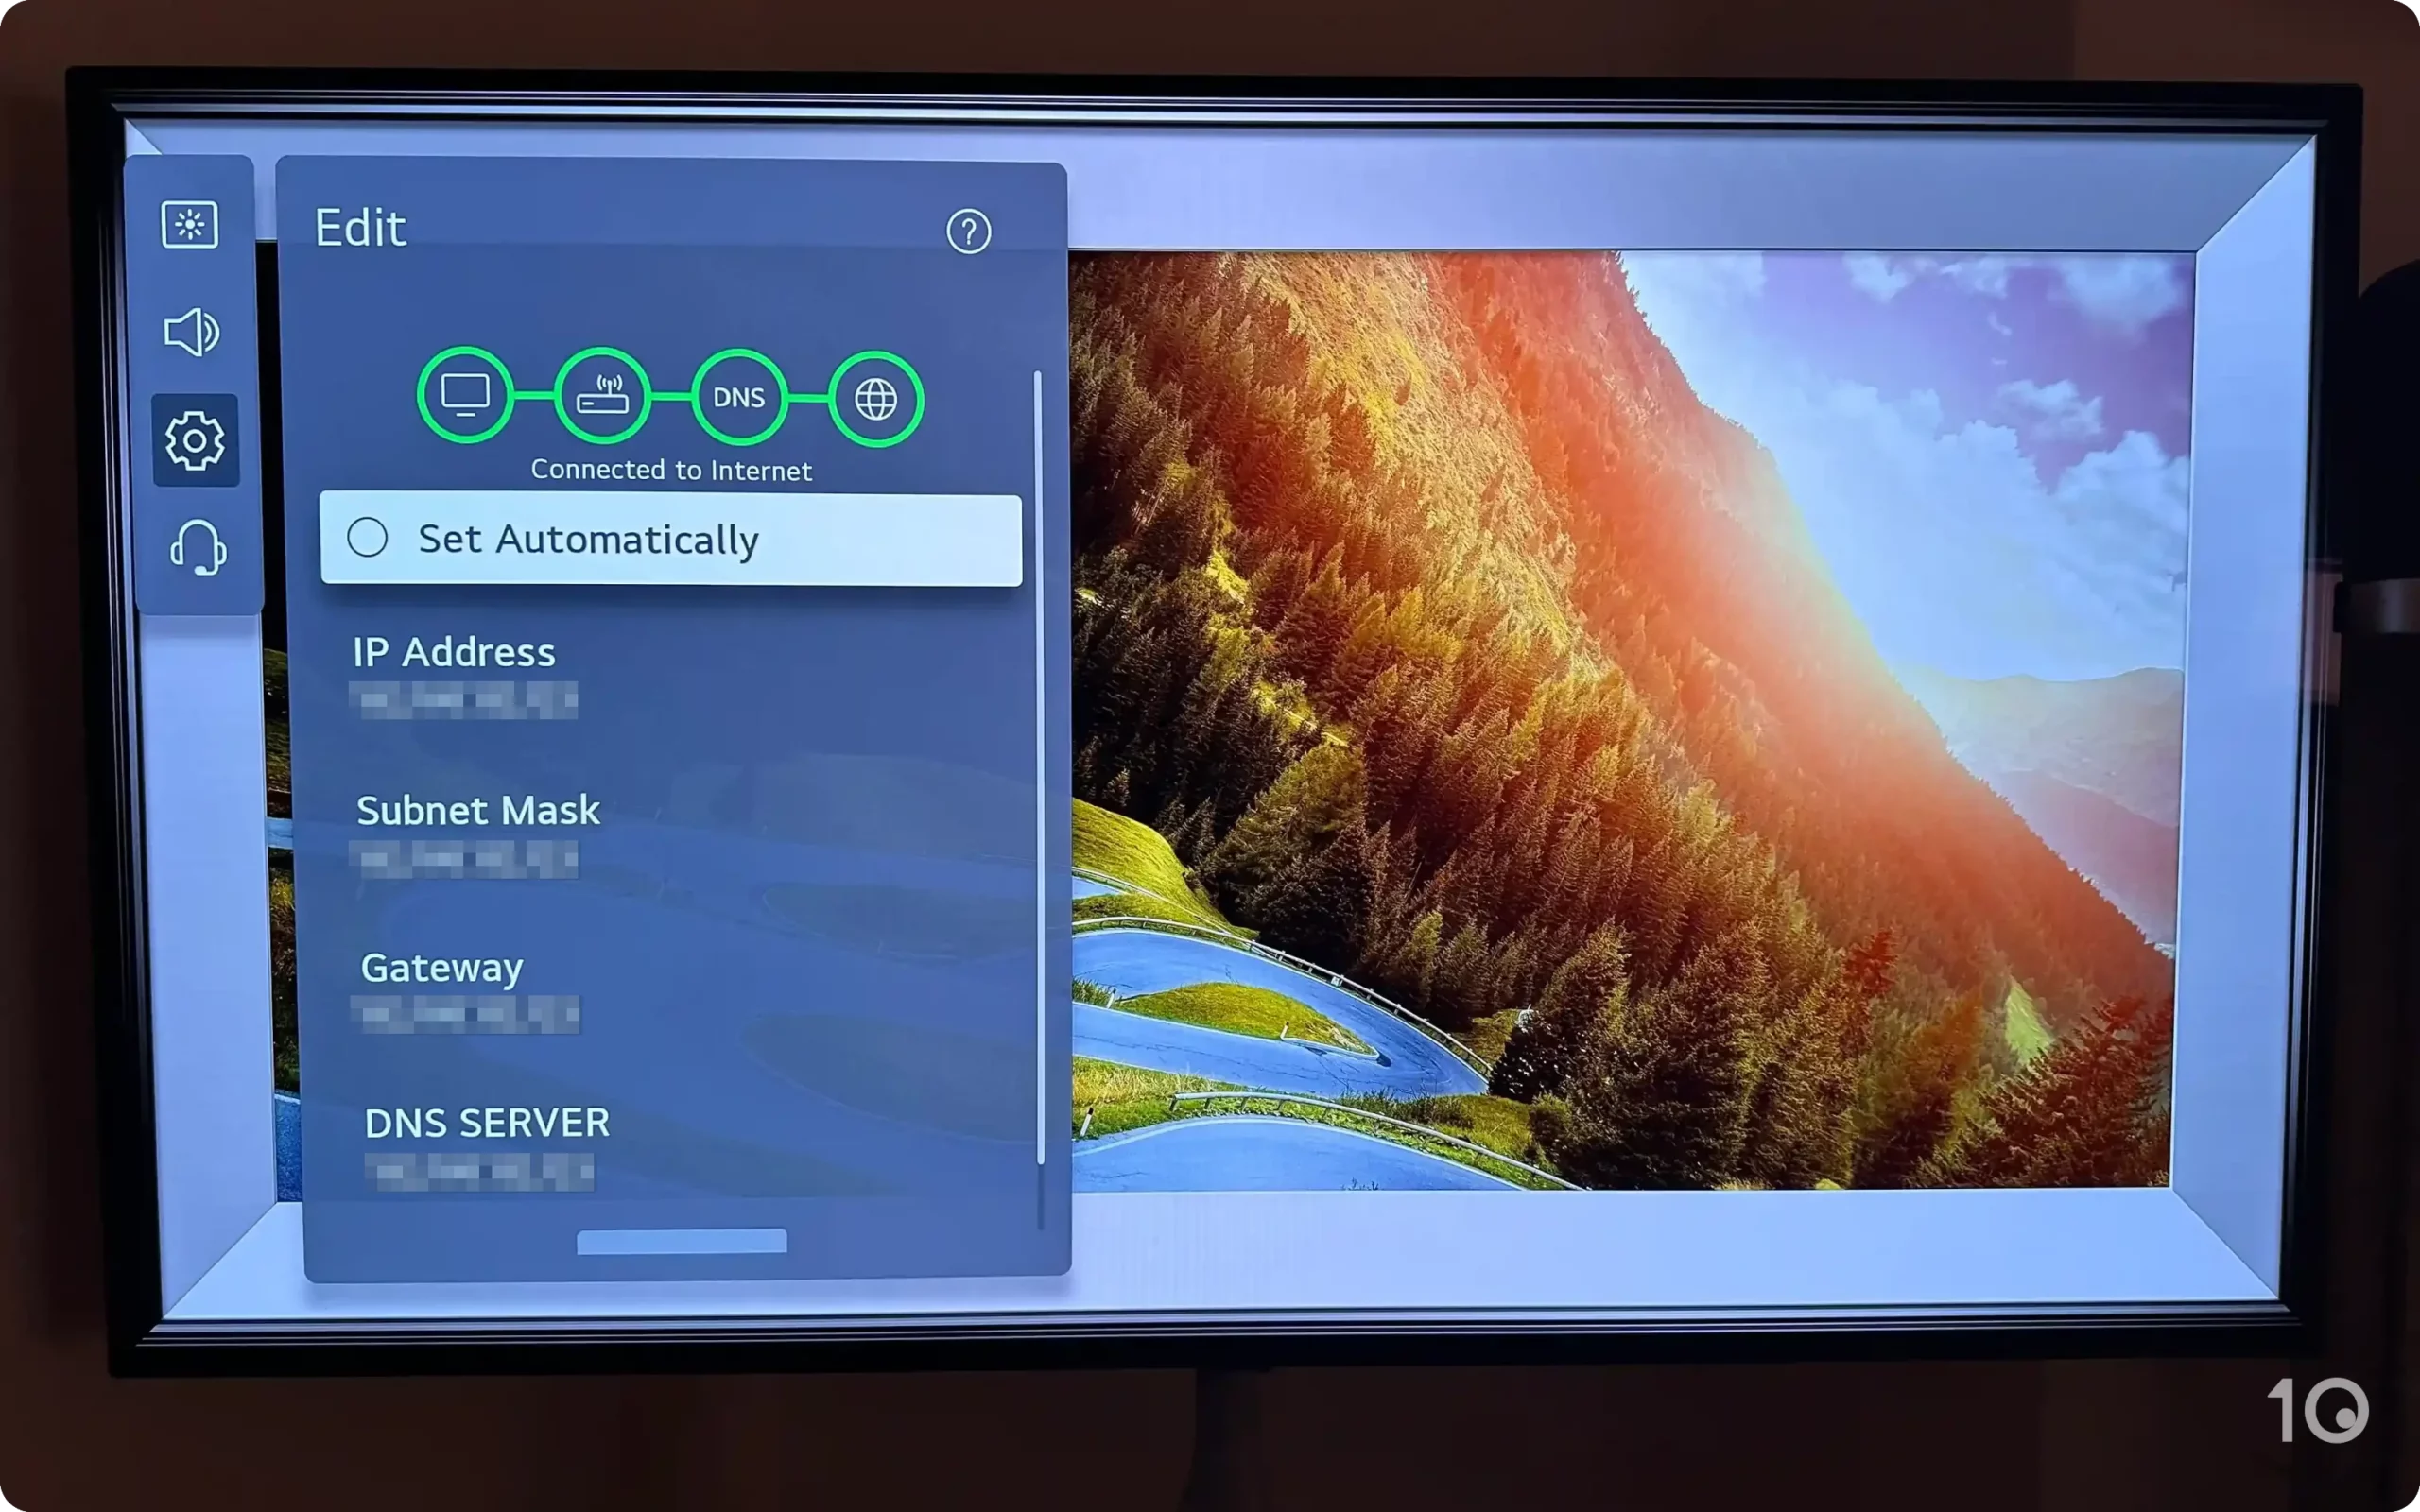 LG TV screen showing network settings. The 'Edit' menu is open, indicating a connection to the internet with options for 'Set Automatically', 'IP Address', 'Subnet Mask', 'Gateway', and 'DNS SERVER'.